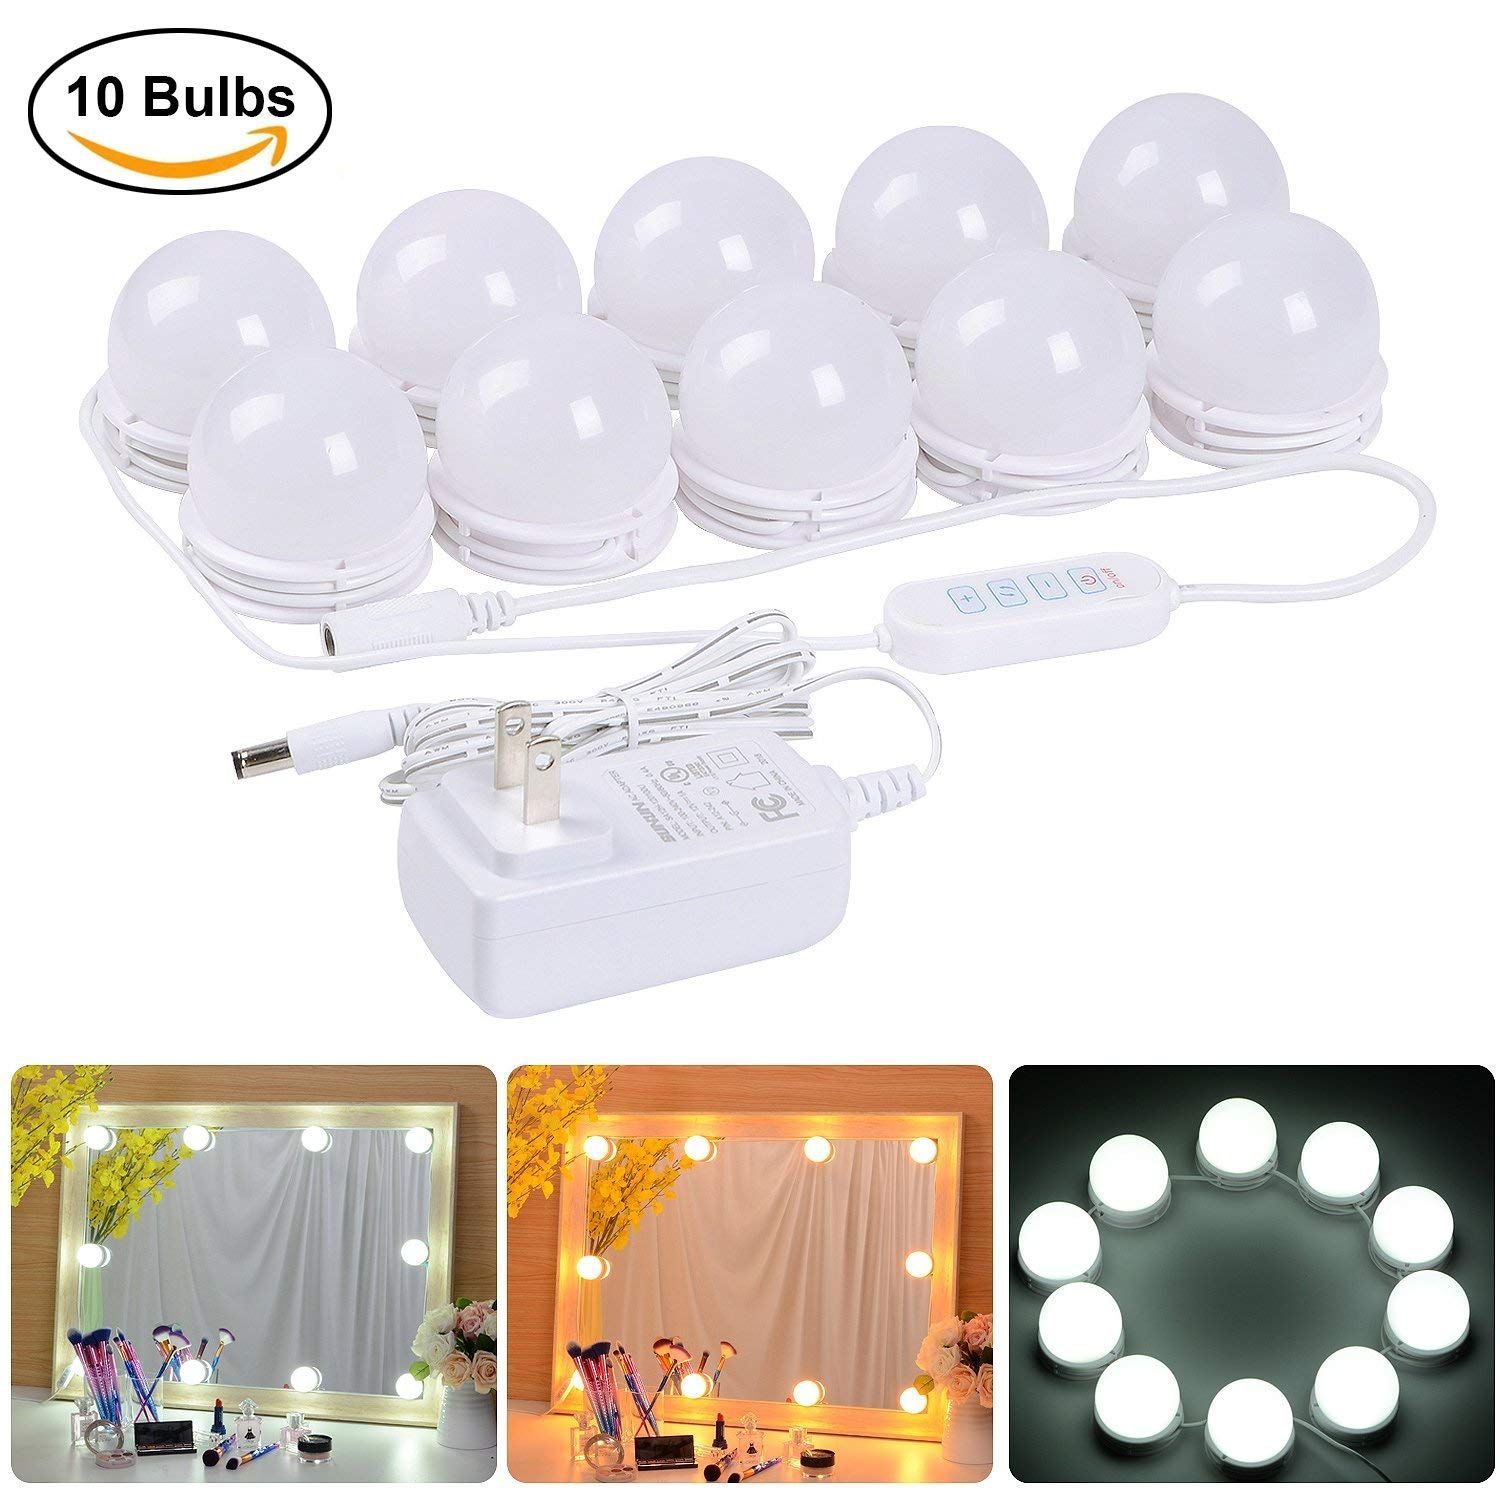 Coolmade Hollywood Style LED Vanity Mirror Lights Kit with 10 Dimmable Light Bulbs, 2 Color Lighting Modes Lighting Fixture Strip for Makeup Vanity Table Set in Dressing Room (Mirror Not Include) - Walmart.com -   14 makeup Light table ideas